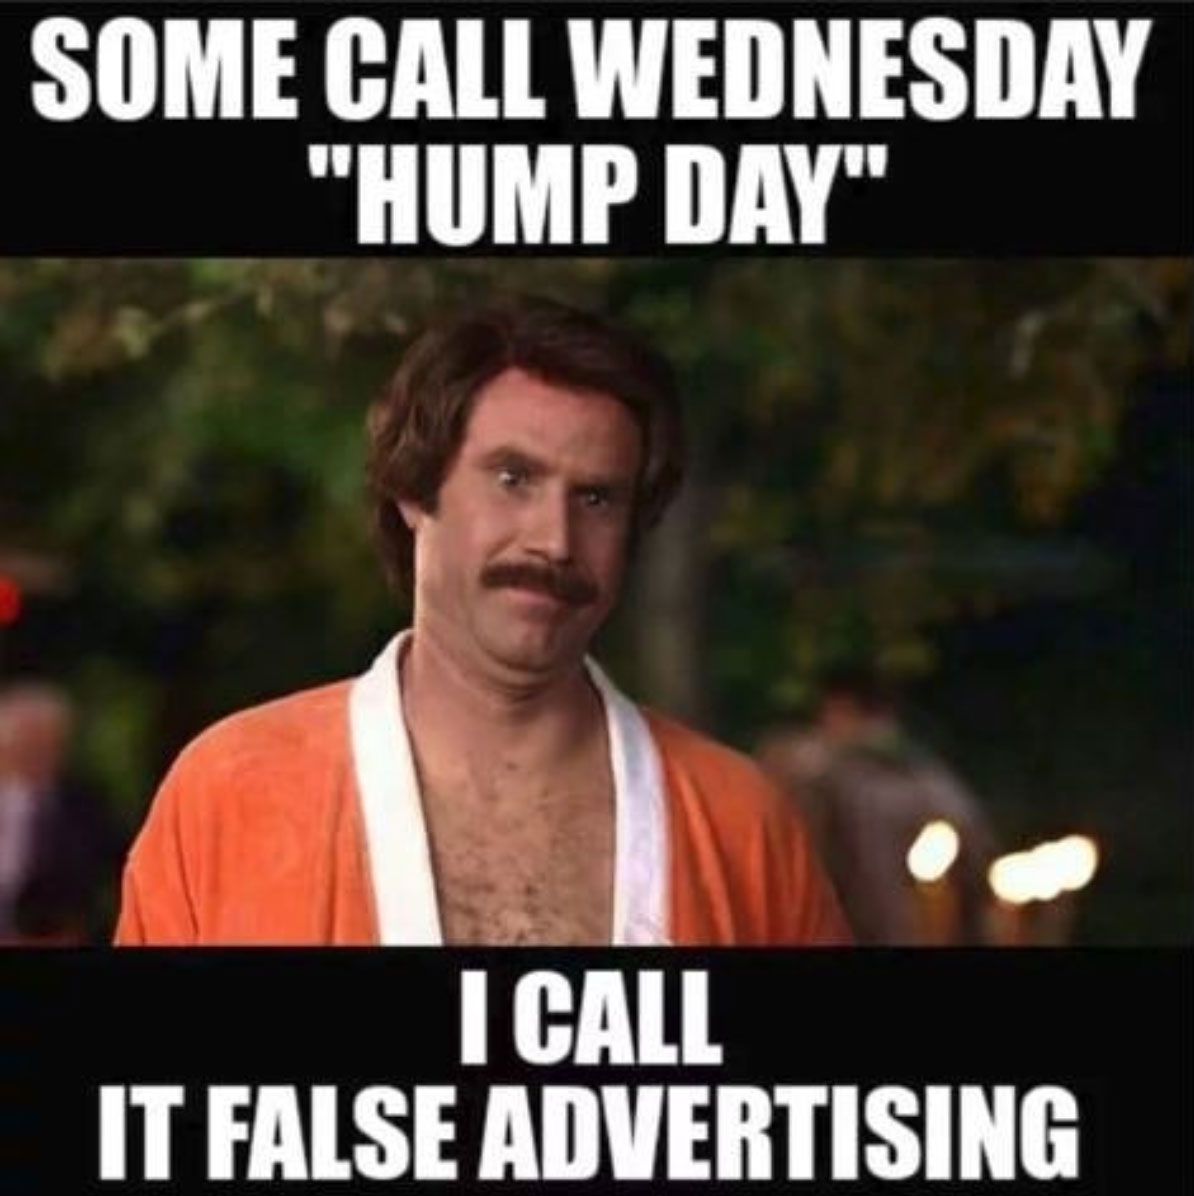 Will Ferrell Humpday Meme that says 'Some Call Wednesday Hump Day, I call it false advertising'